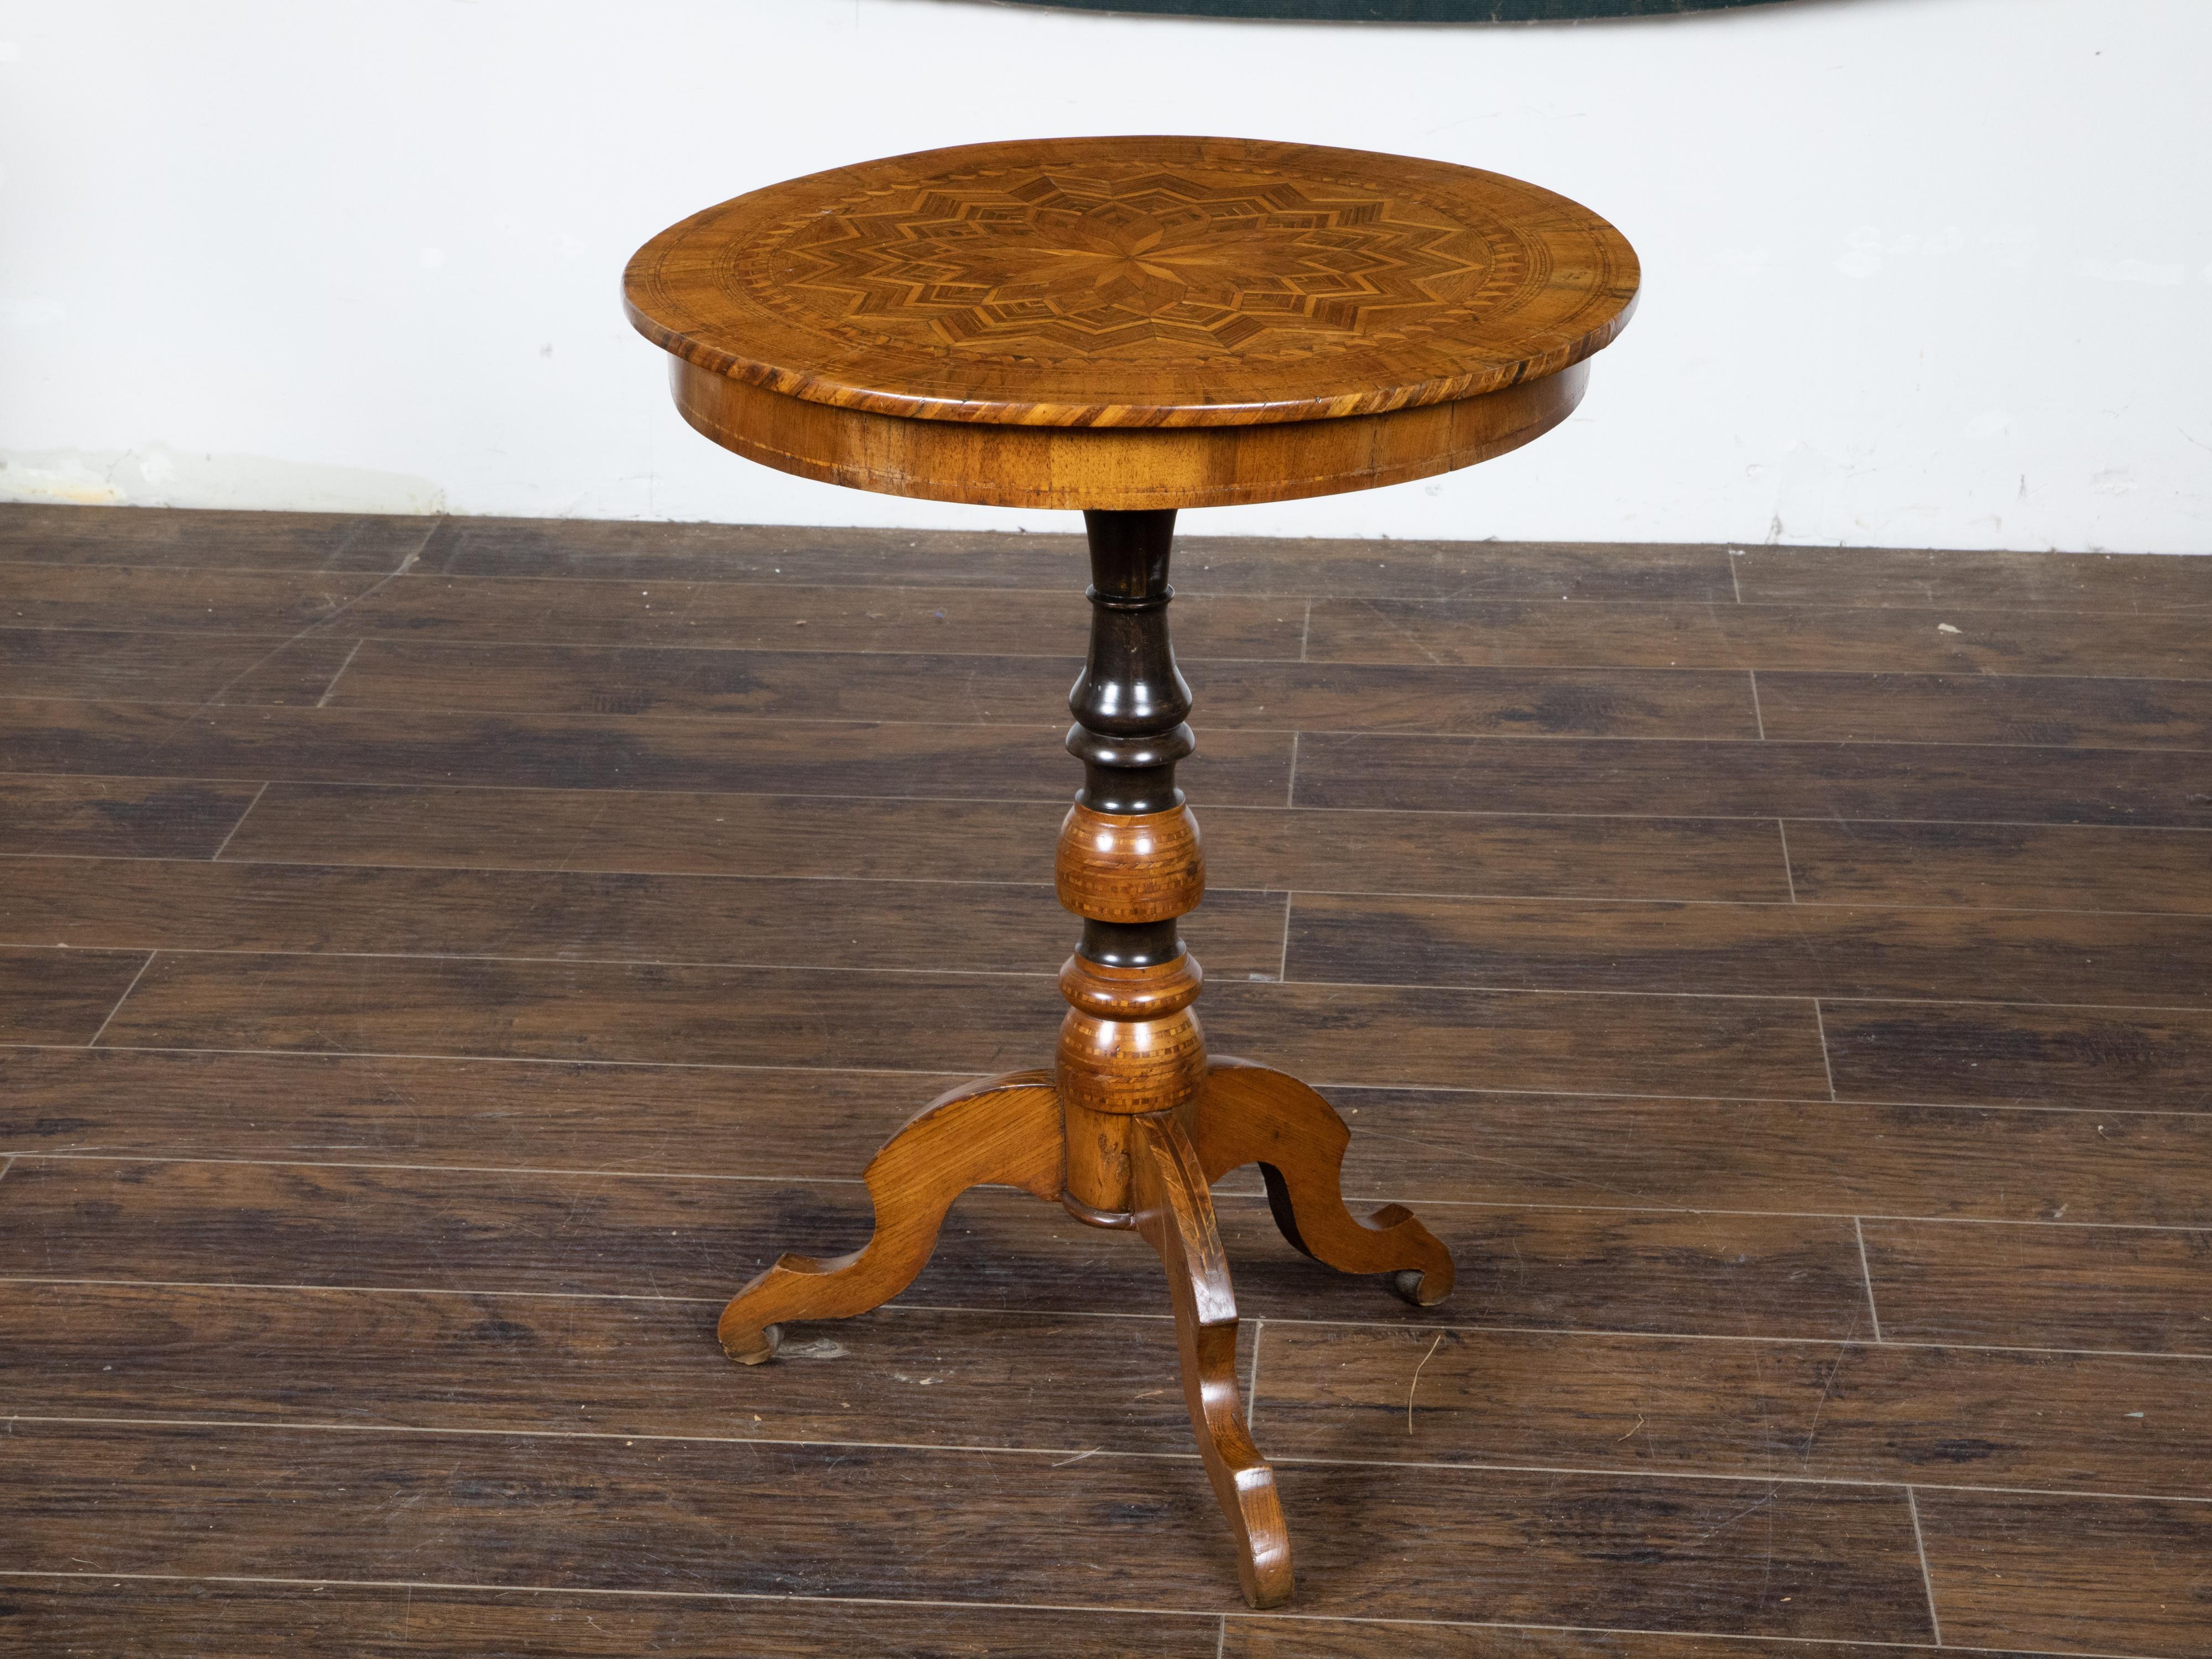 Italian 1890s Walnut Guéridon Table with Marquetry Top and Ebonized Pedestal In Good Condition For Sale In Atlanta, GA